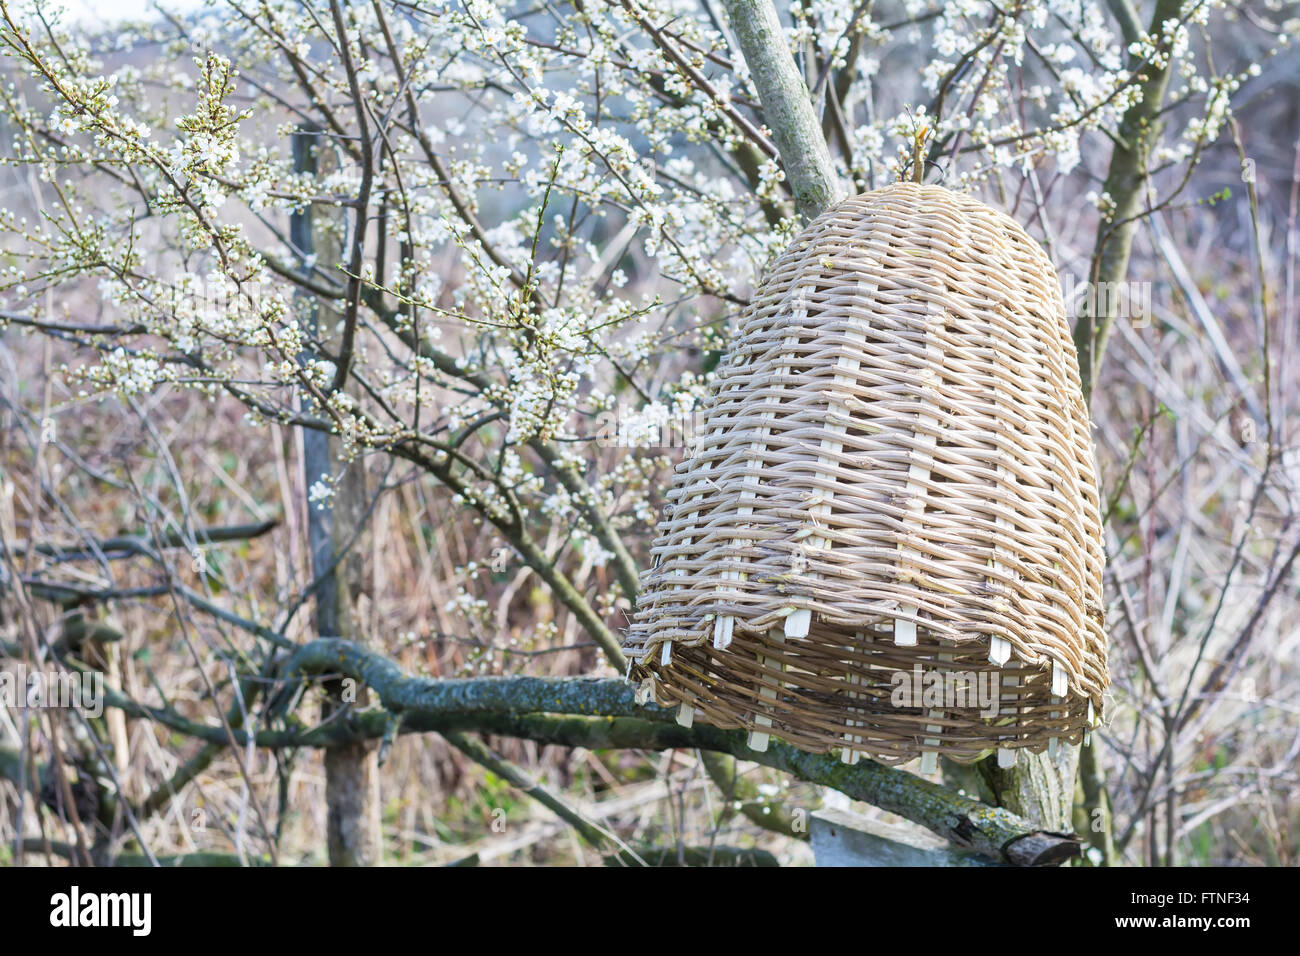 Handmade beehive to capture bee swarms in nature Stock Photo